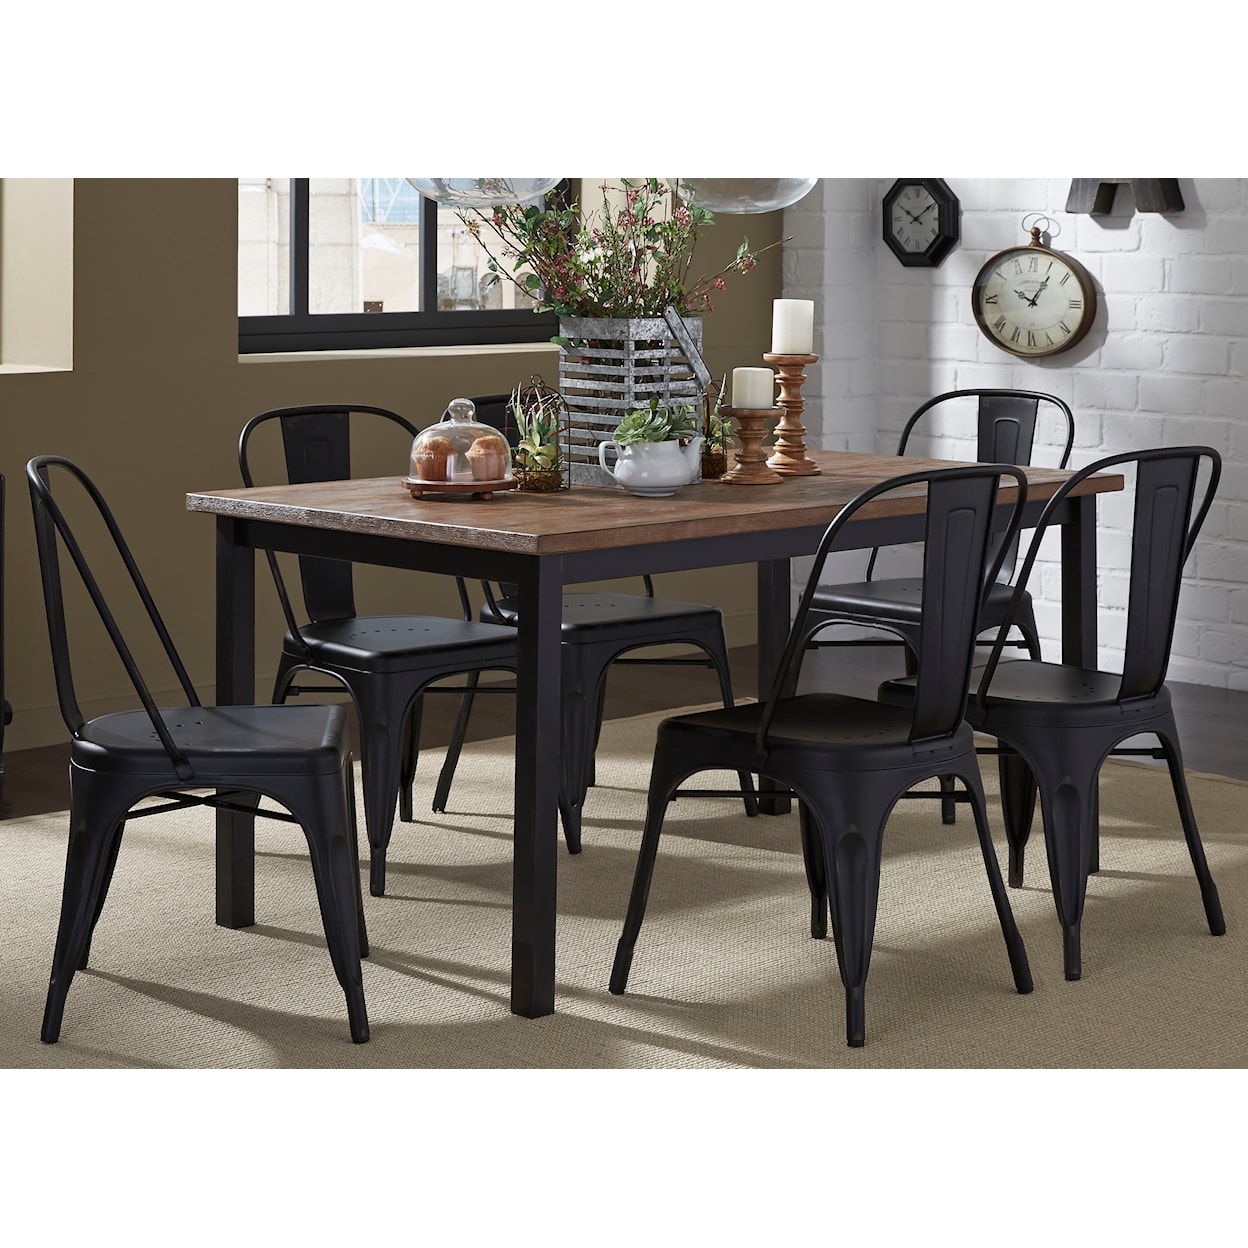 Liberty Furniture Vintage Dining Series 7-Piece Table and Chair Set